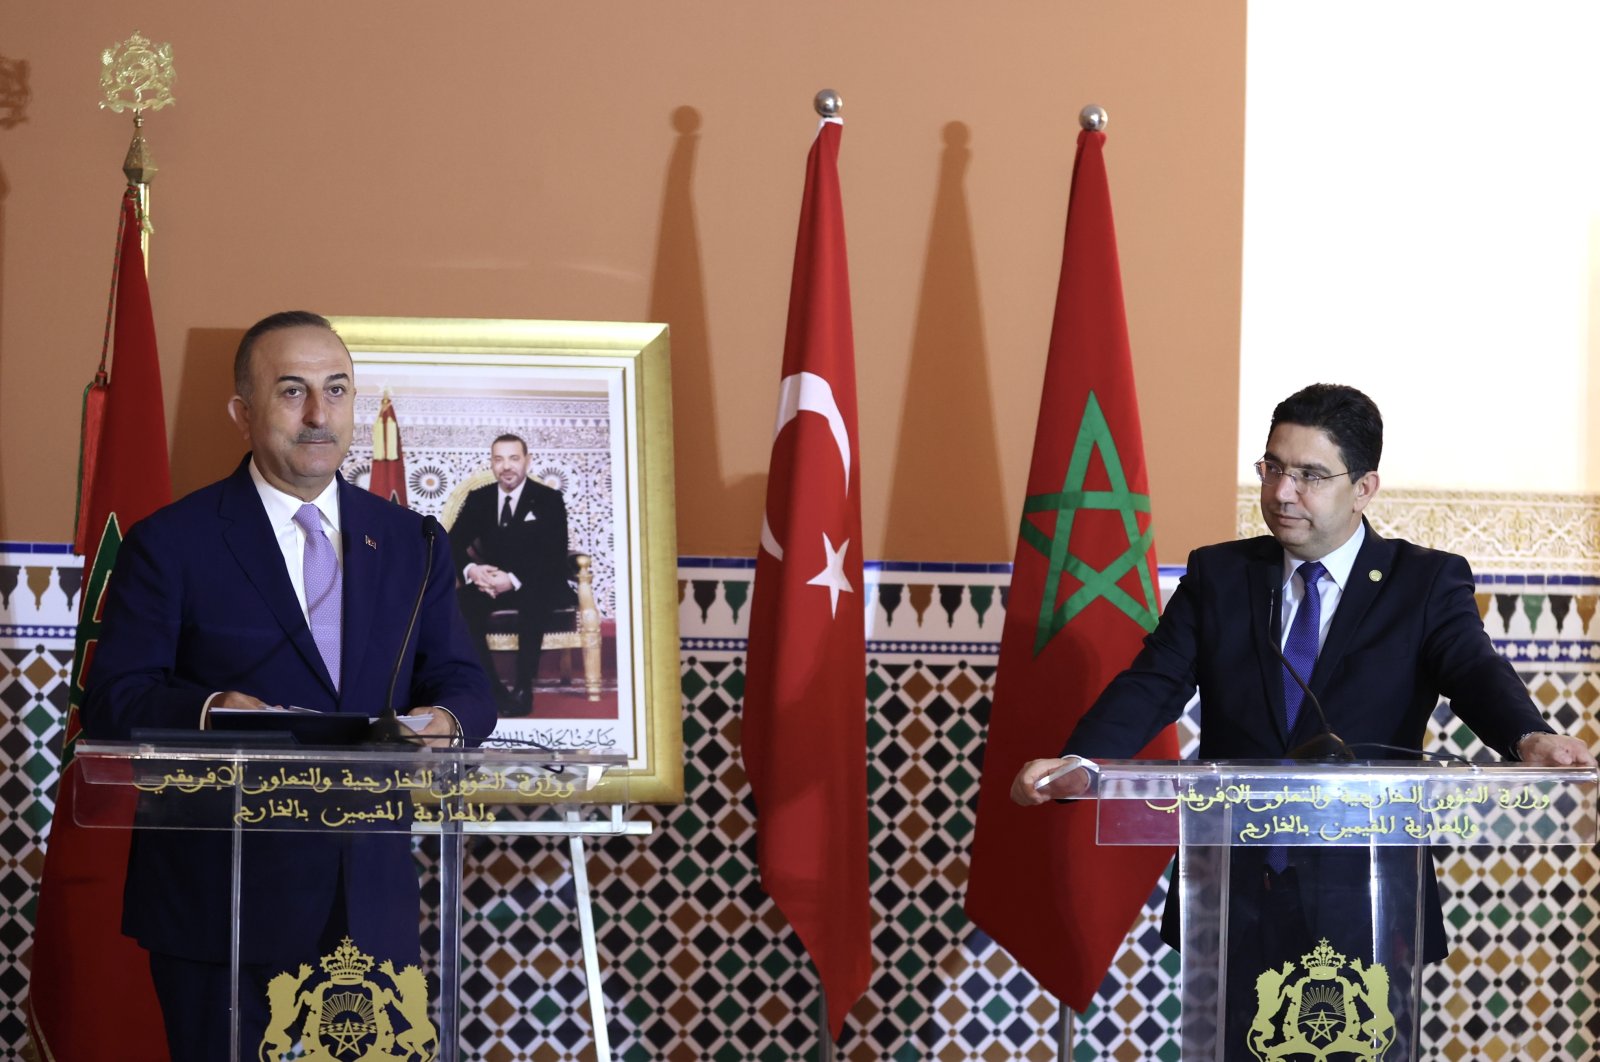 Foreign Minister Mevlüt Çavuşoğlu attends a joint news conference with Moroccan counterpart Nasser Bourita in Marrakech, Morocco, May 11, 2022. (AA Photo0